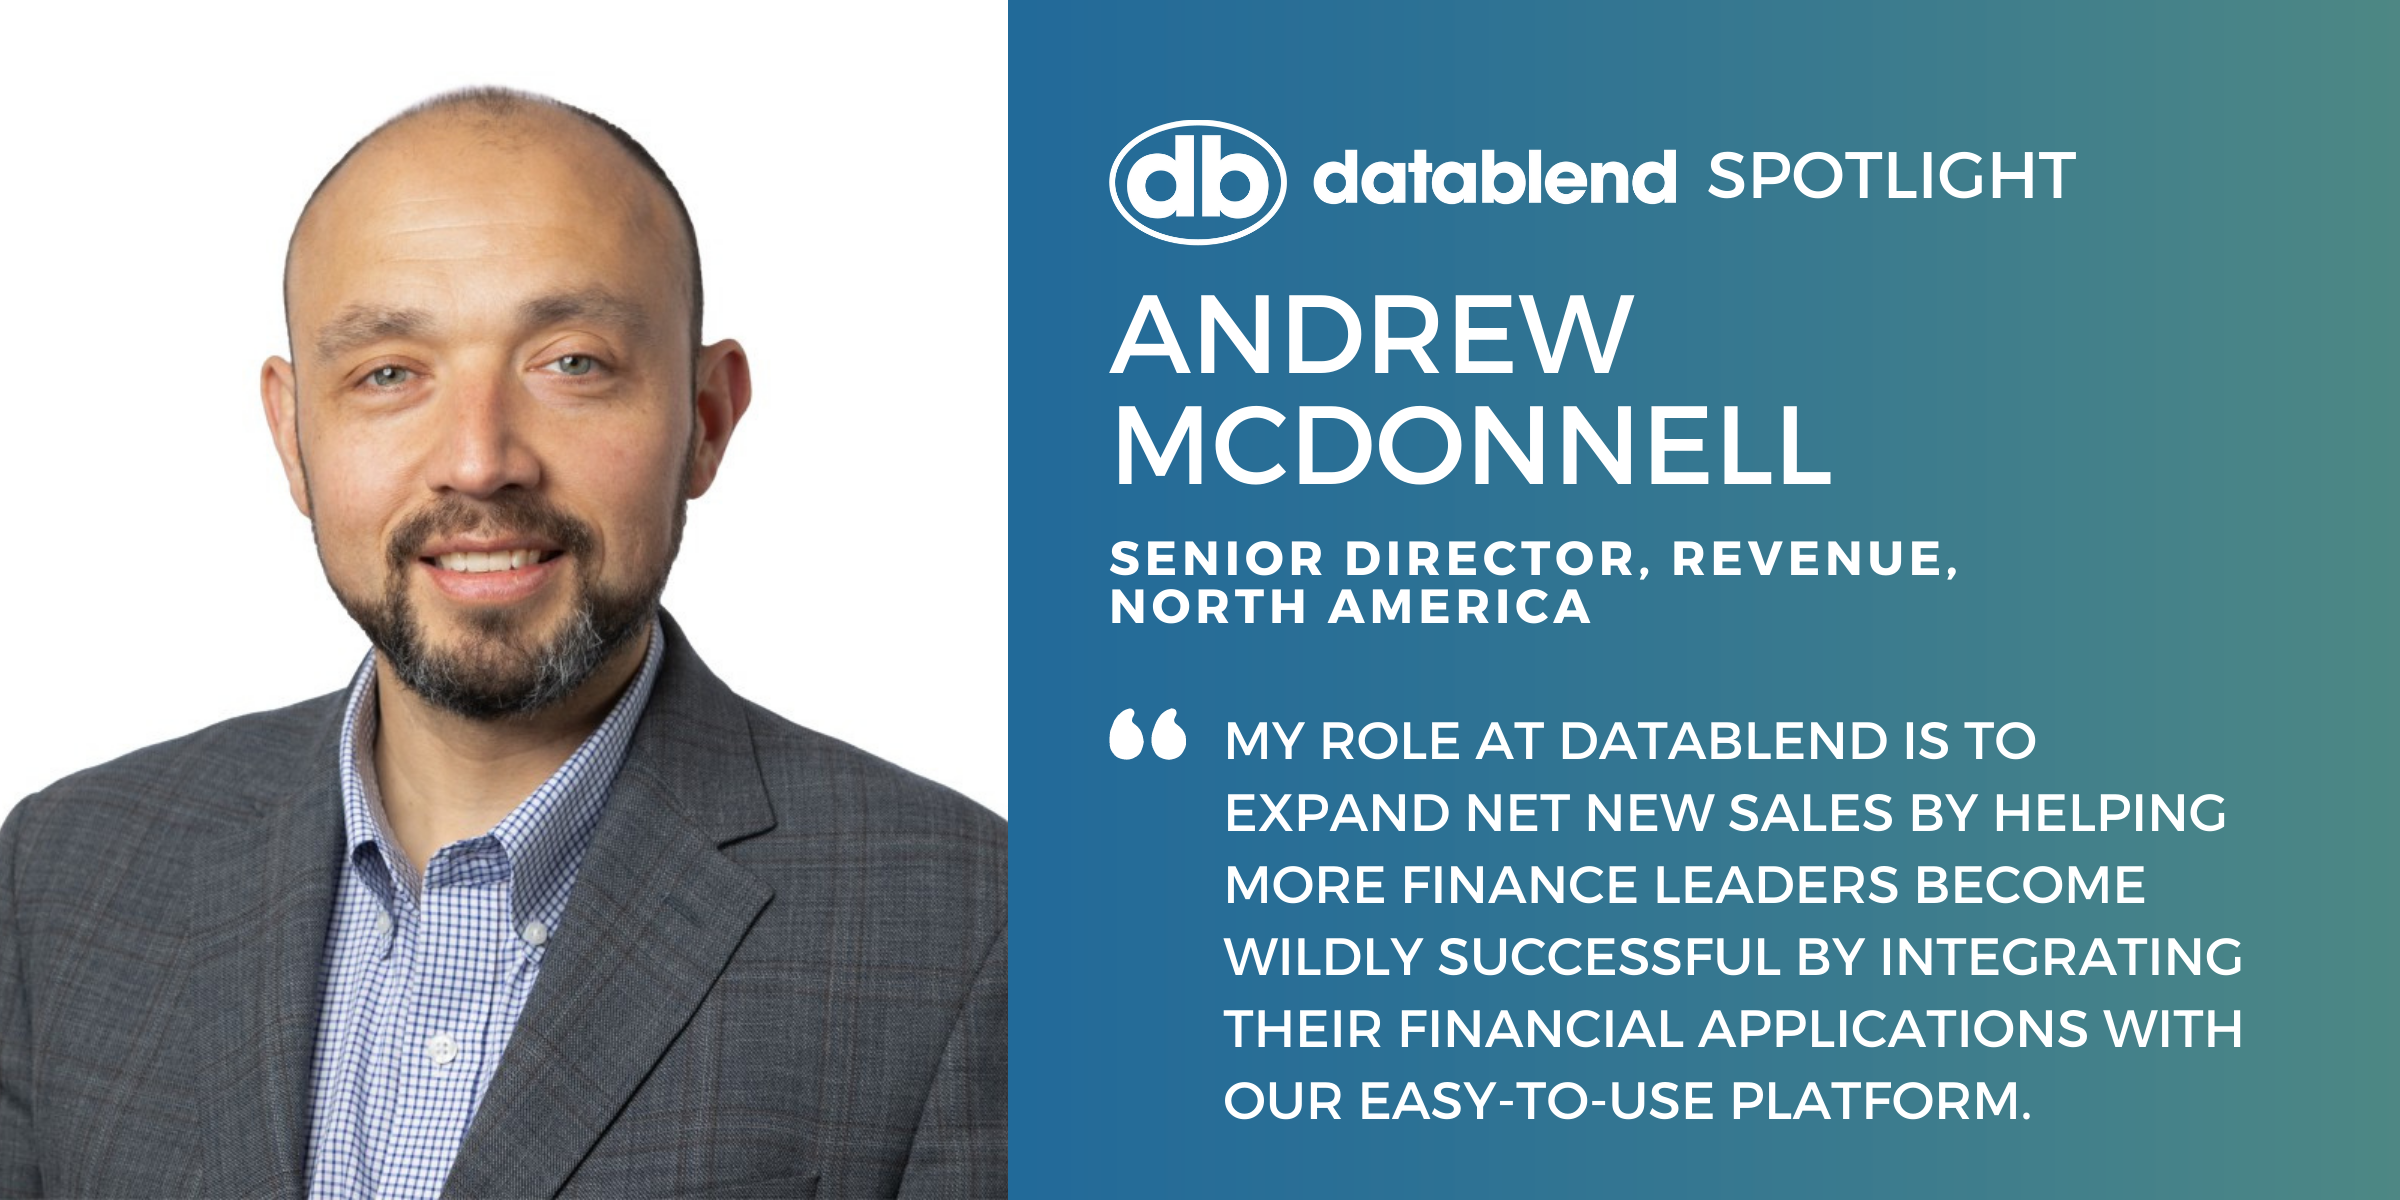 DataBlend Spotlight: Have you met Andrew McDonnell yet? He's our brand-new Senior Director, Revenue, North America.